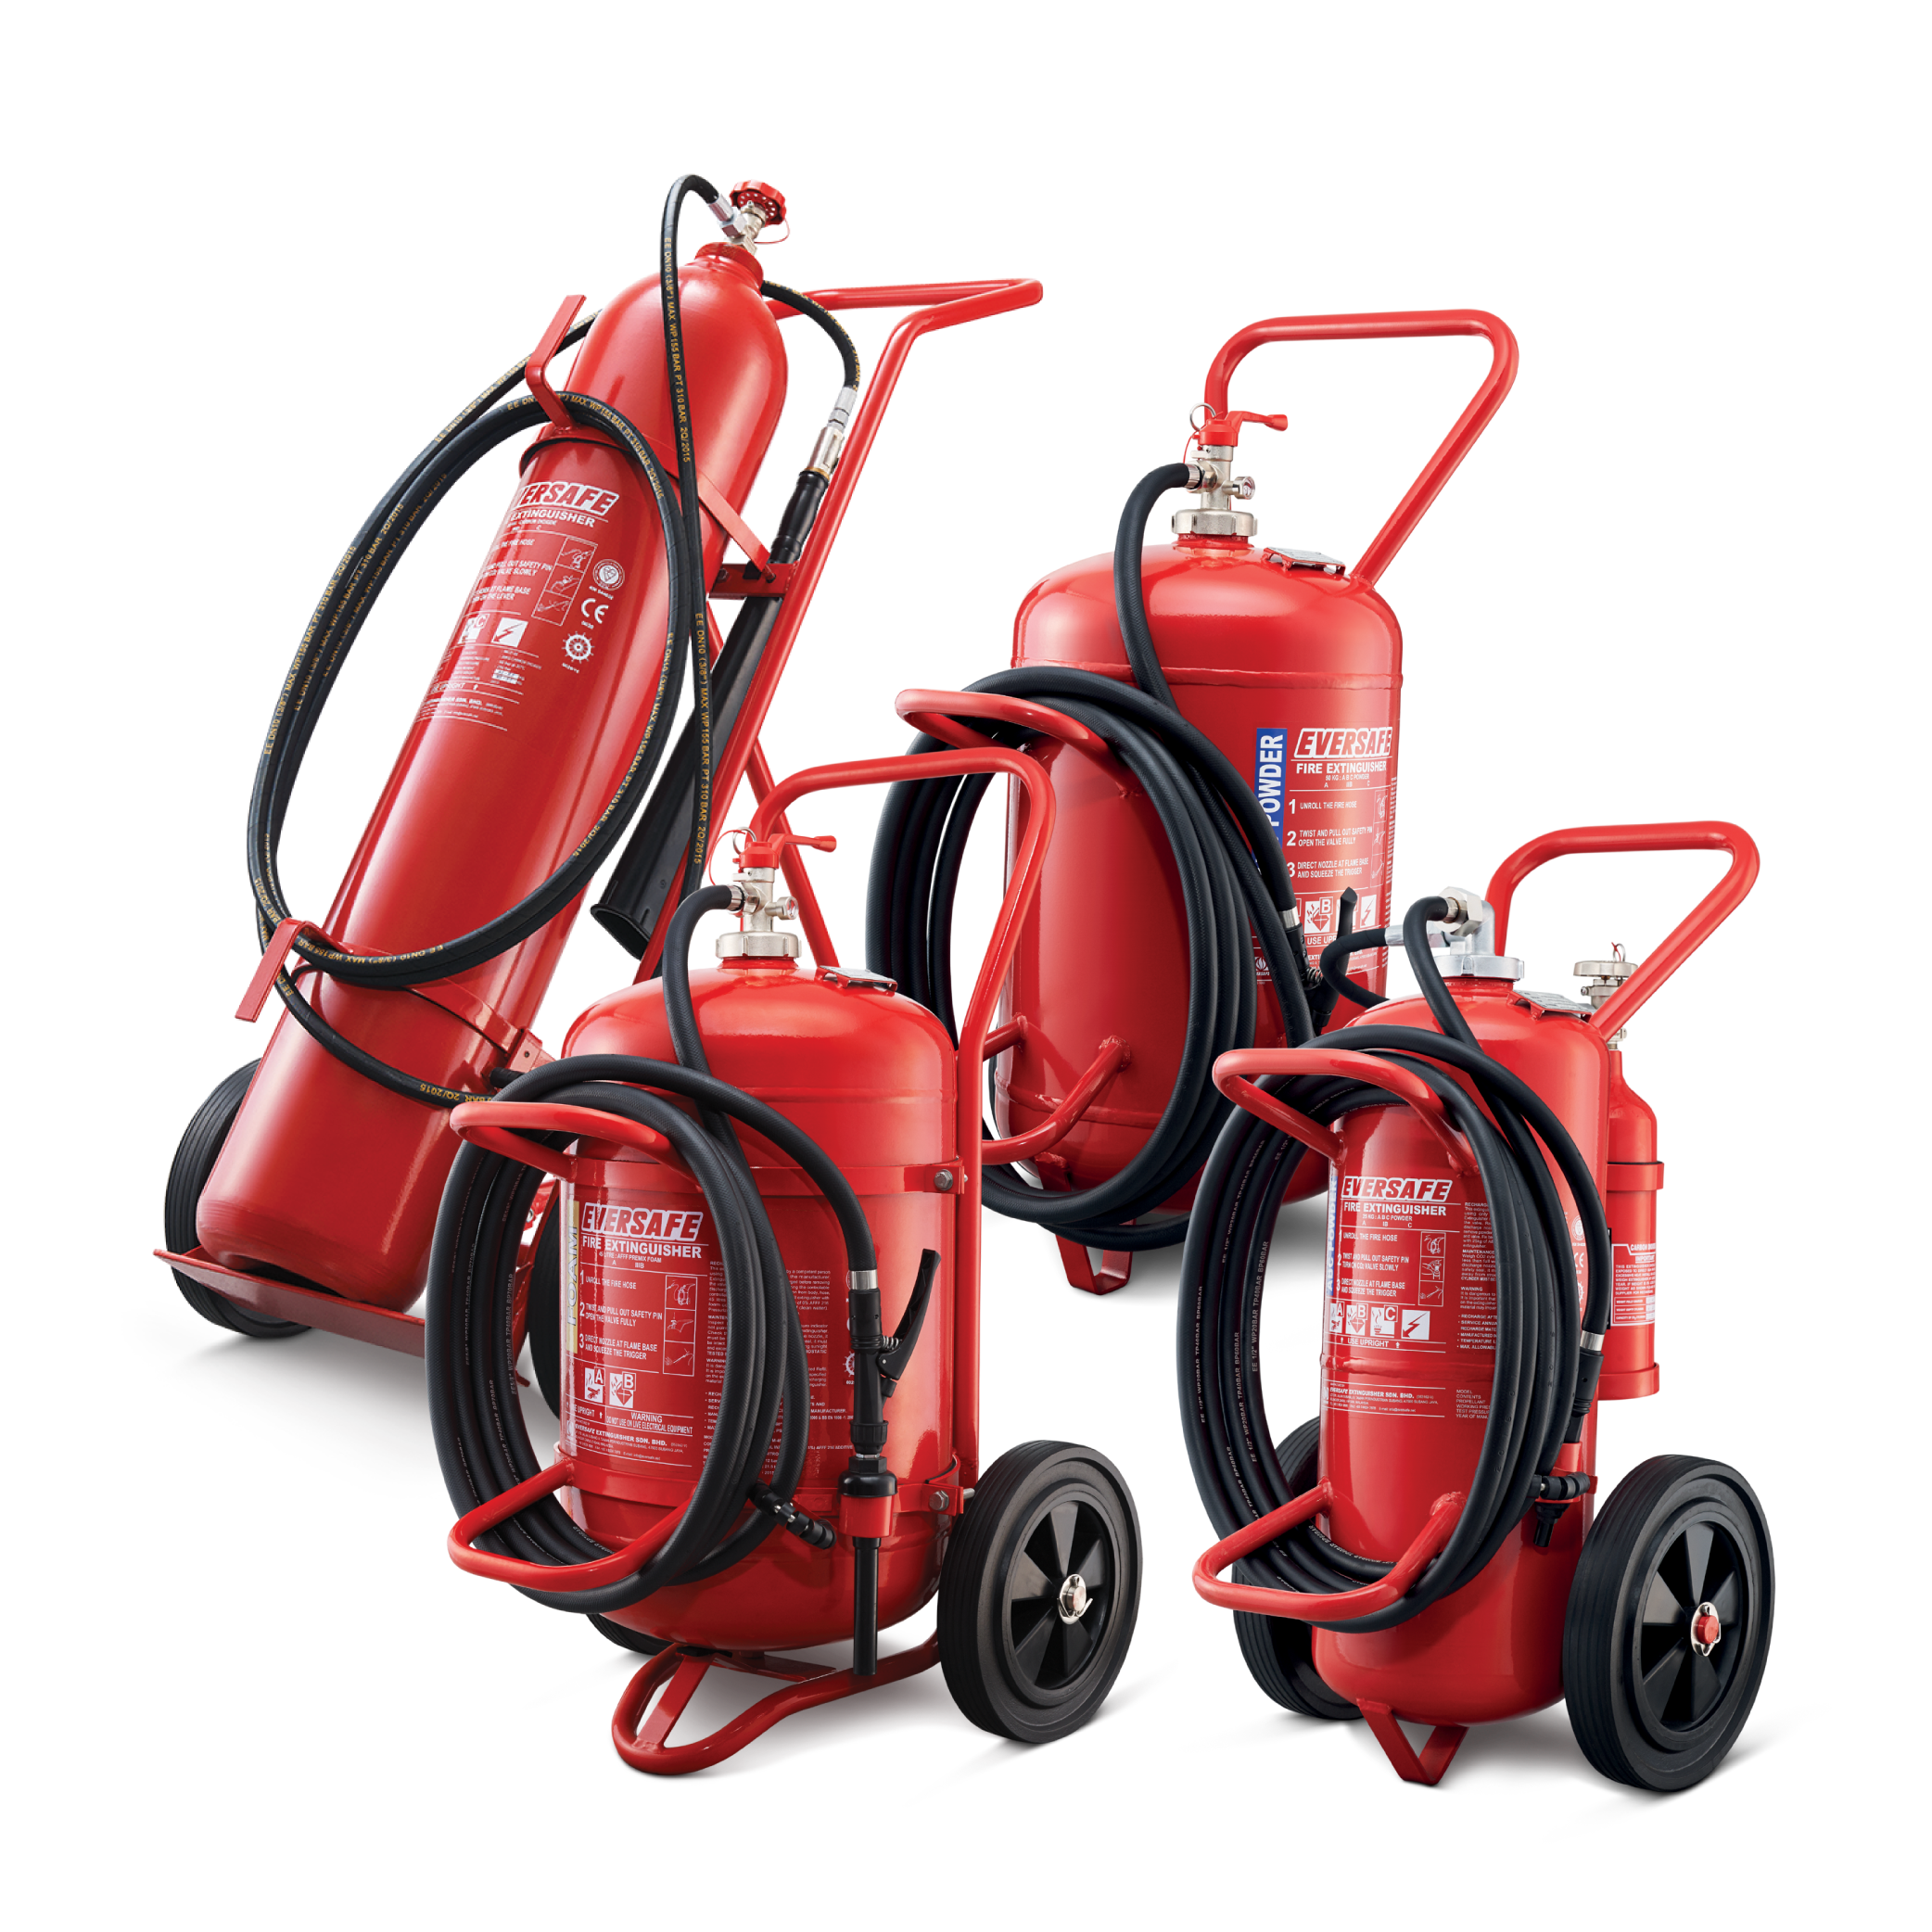 03-Mobile Fire Extinguishers